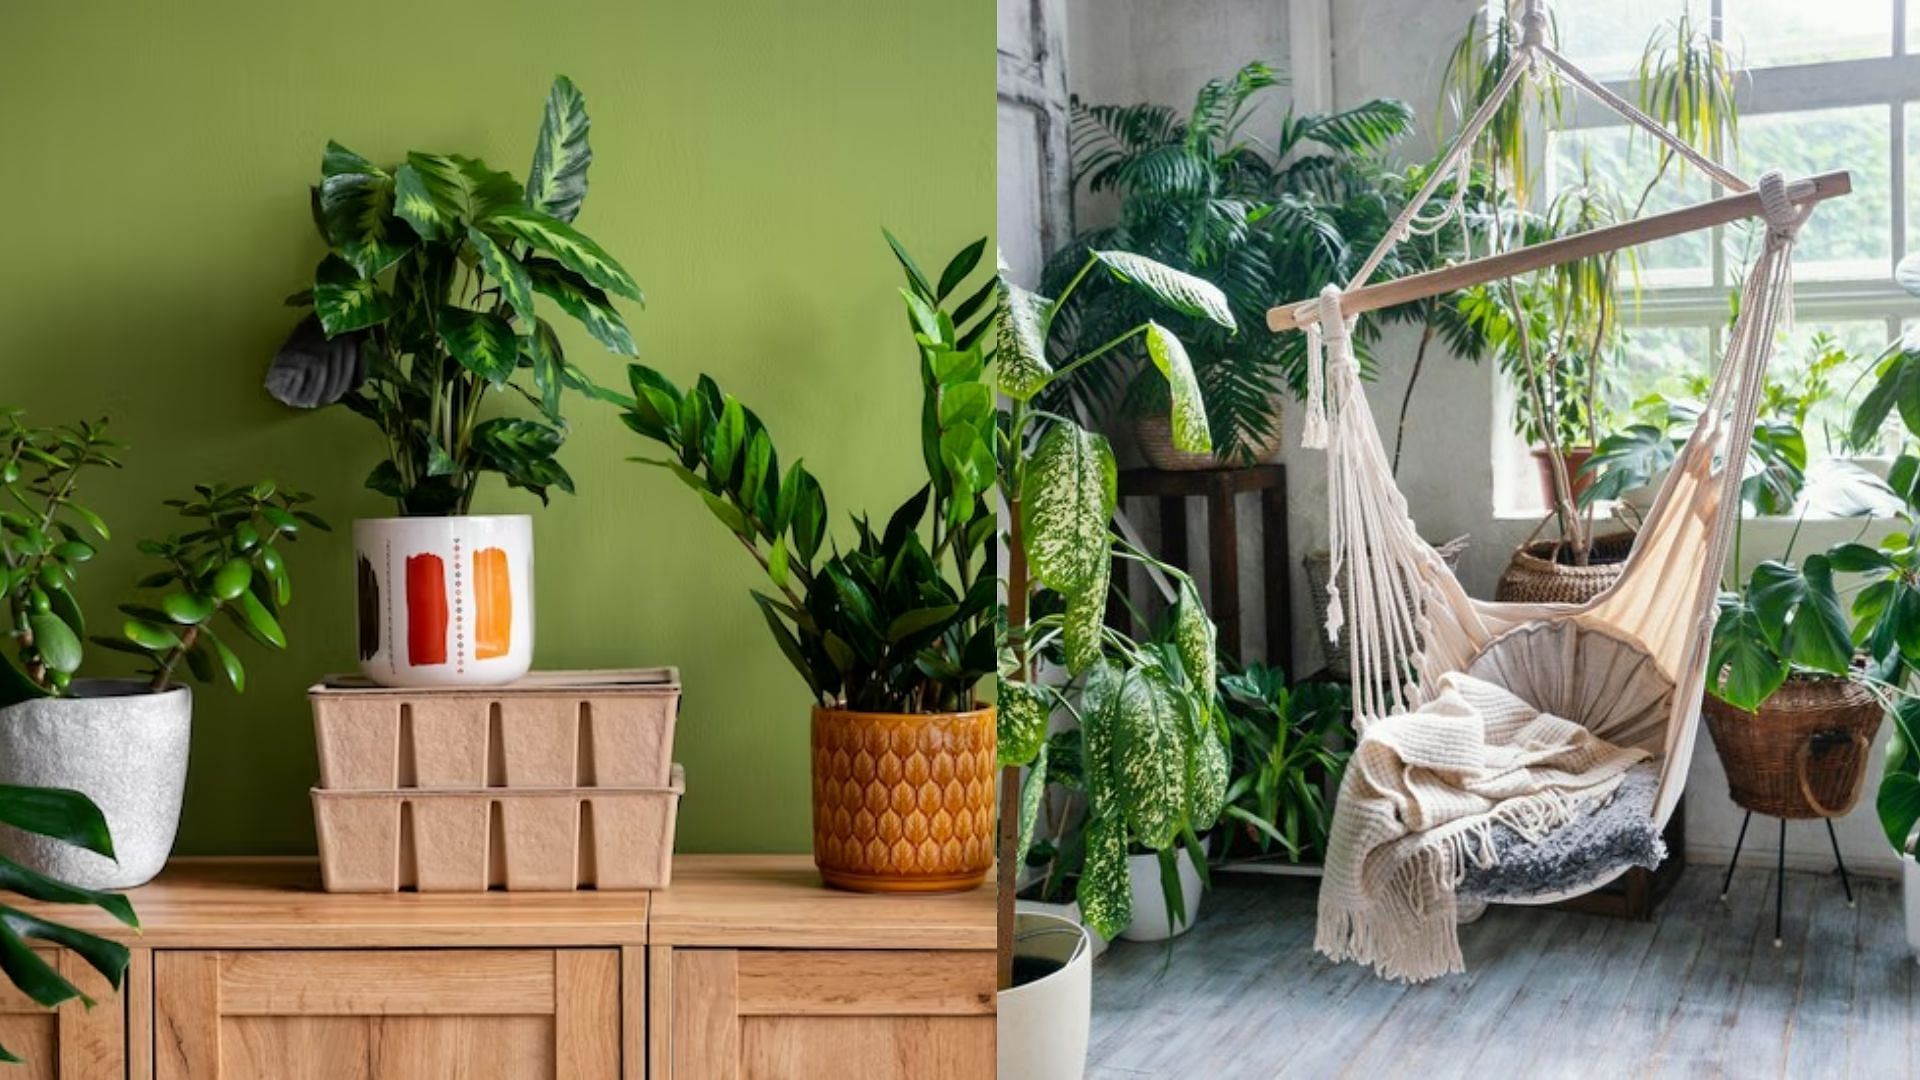 8 Sustainable home decor ideas for your house